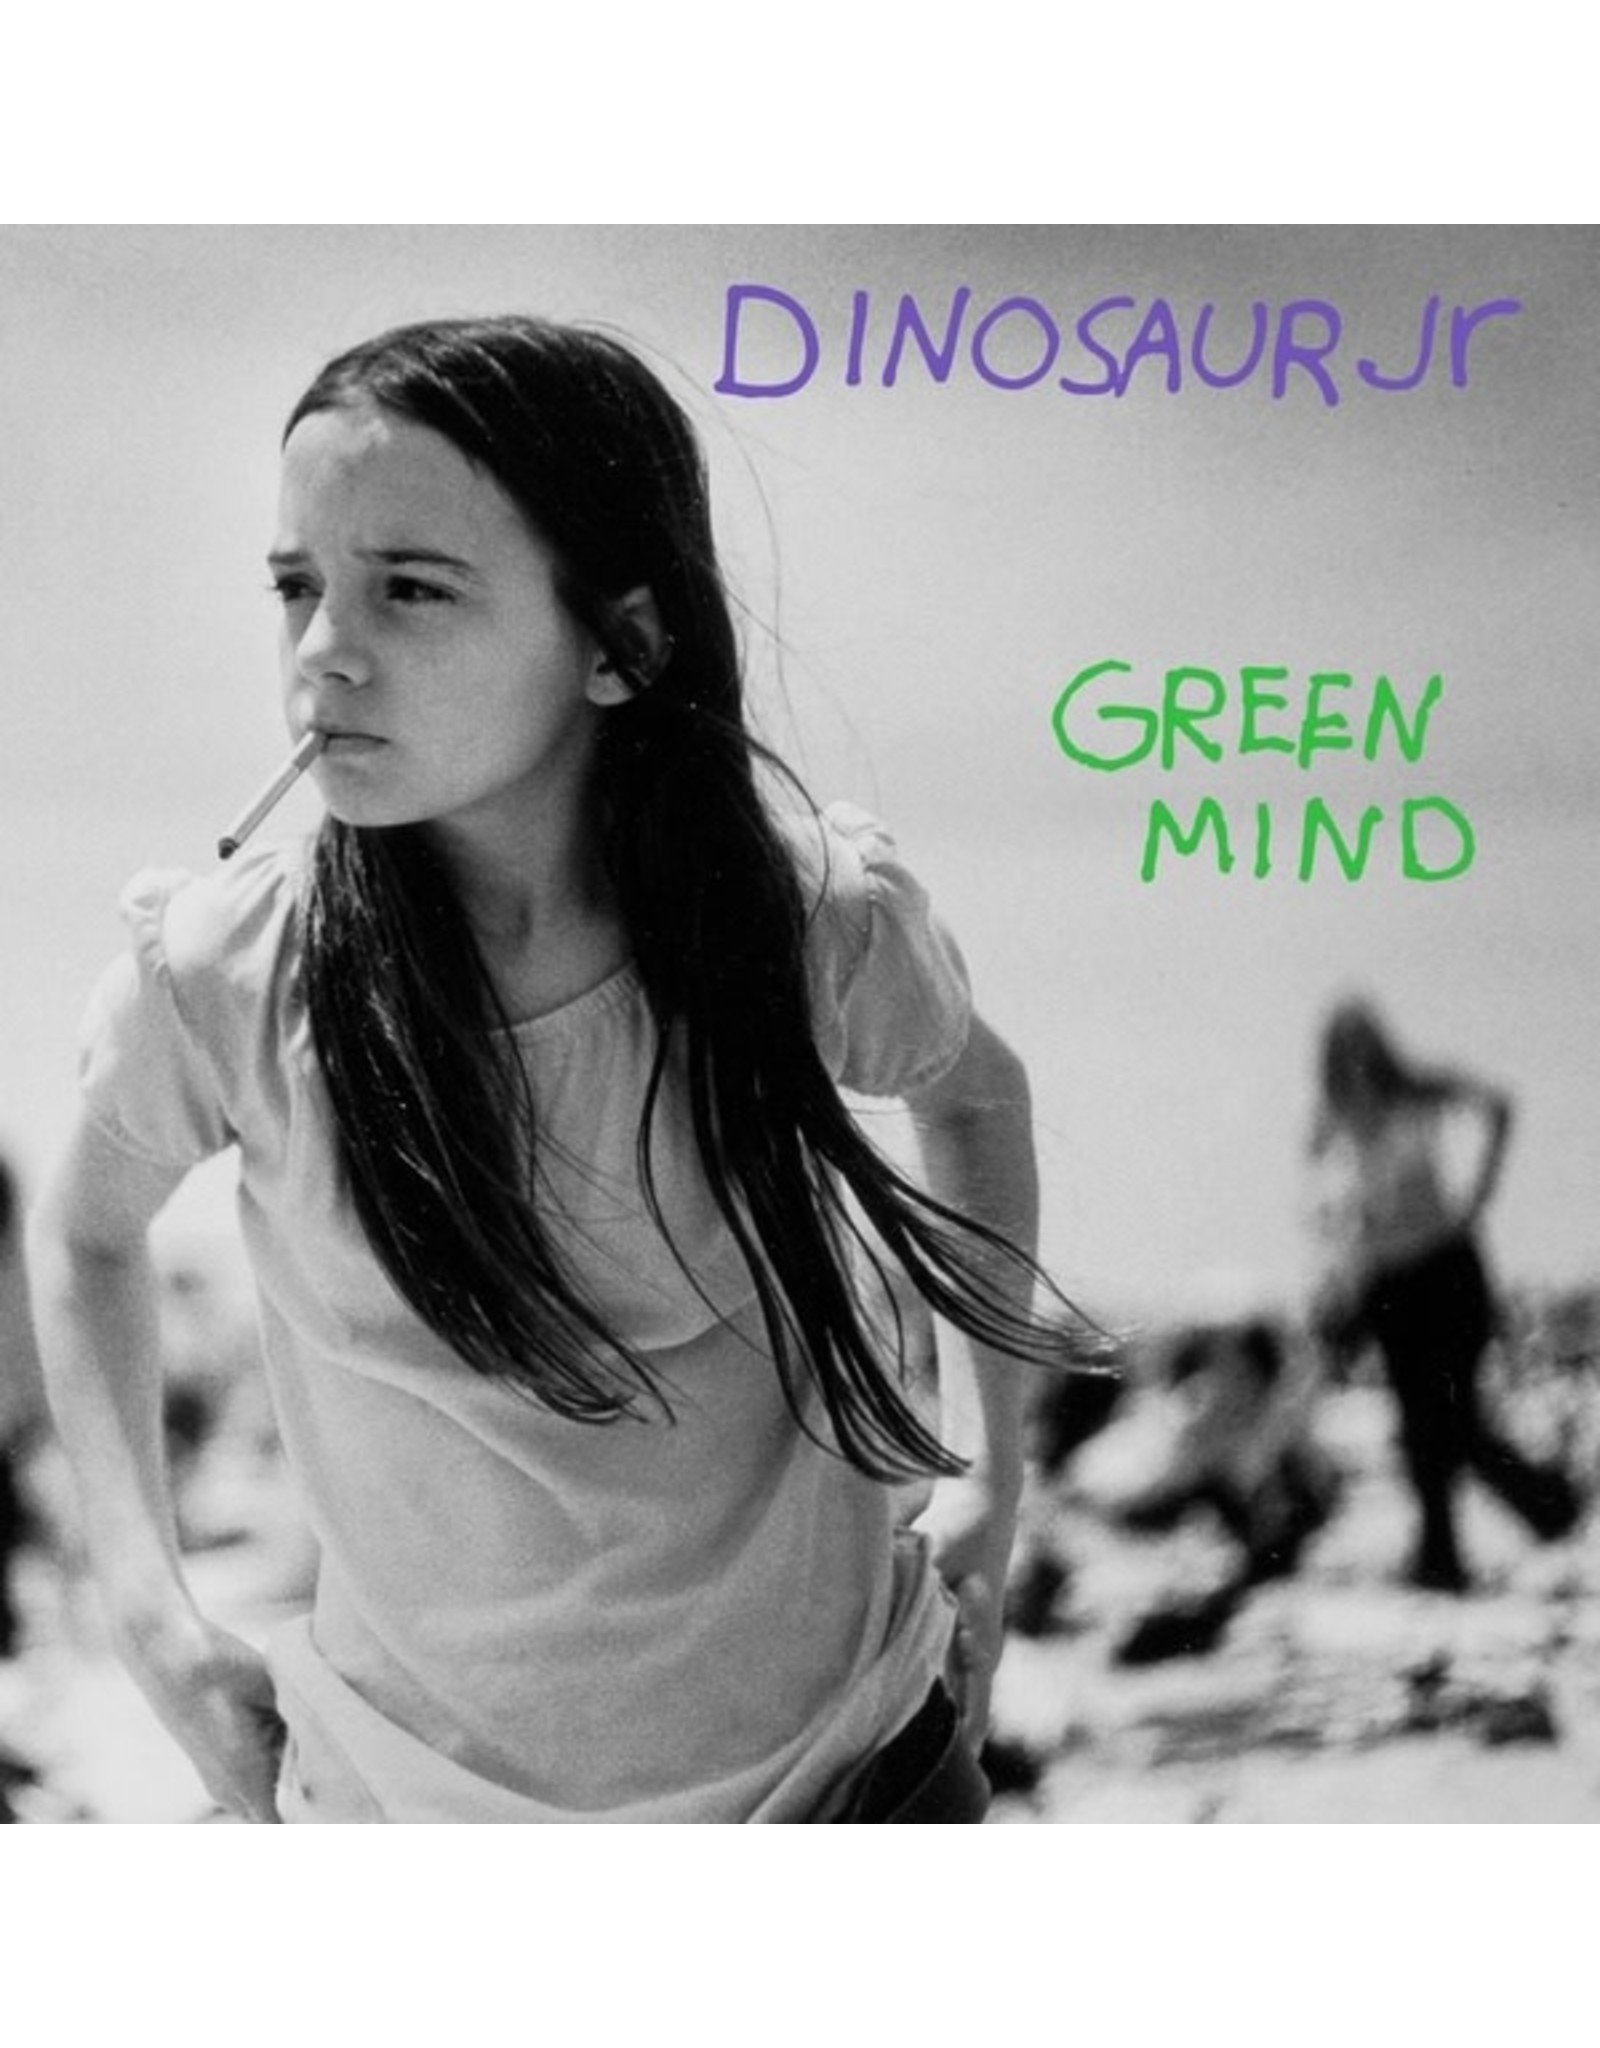 Cherry Red Dinosaur Jr.: Green Mind: Deluxe Expanded Edition (Double Gatefold Green Vinyl) LP